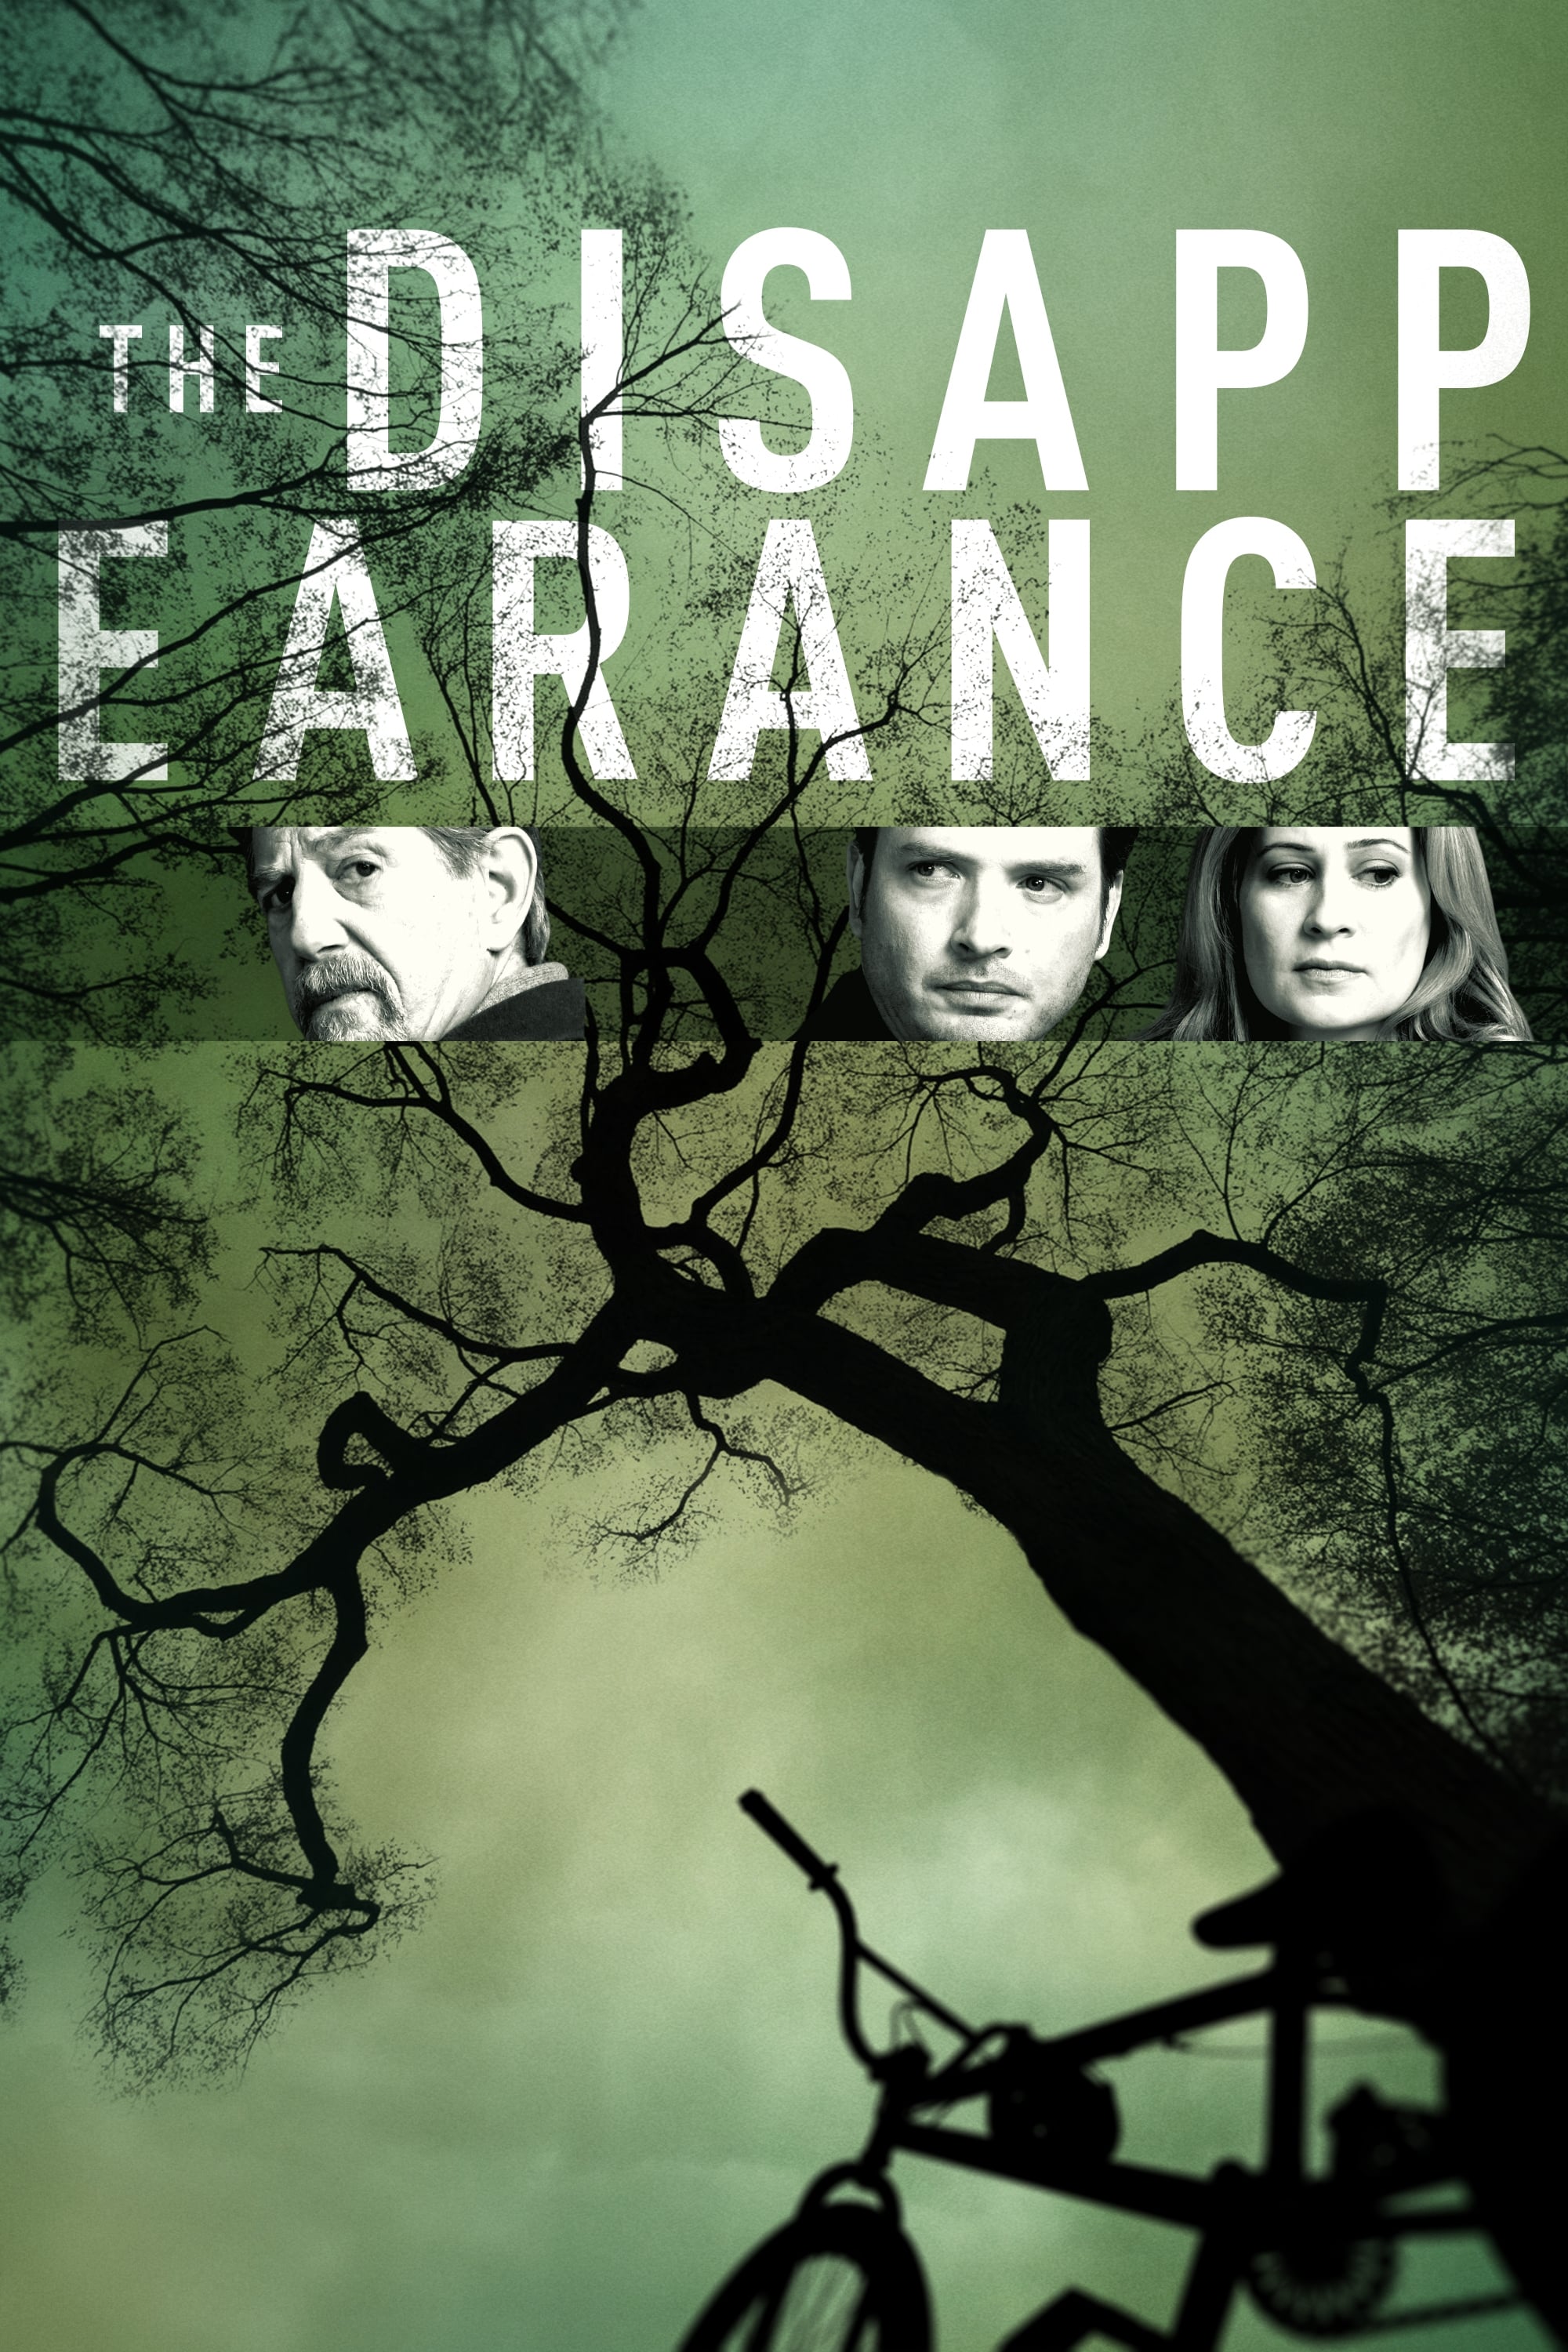 The Disappearance TV Shows About Kidnapping